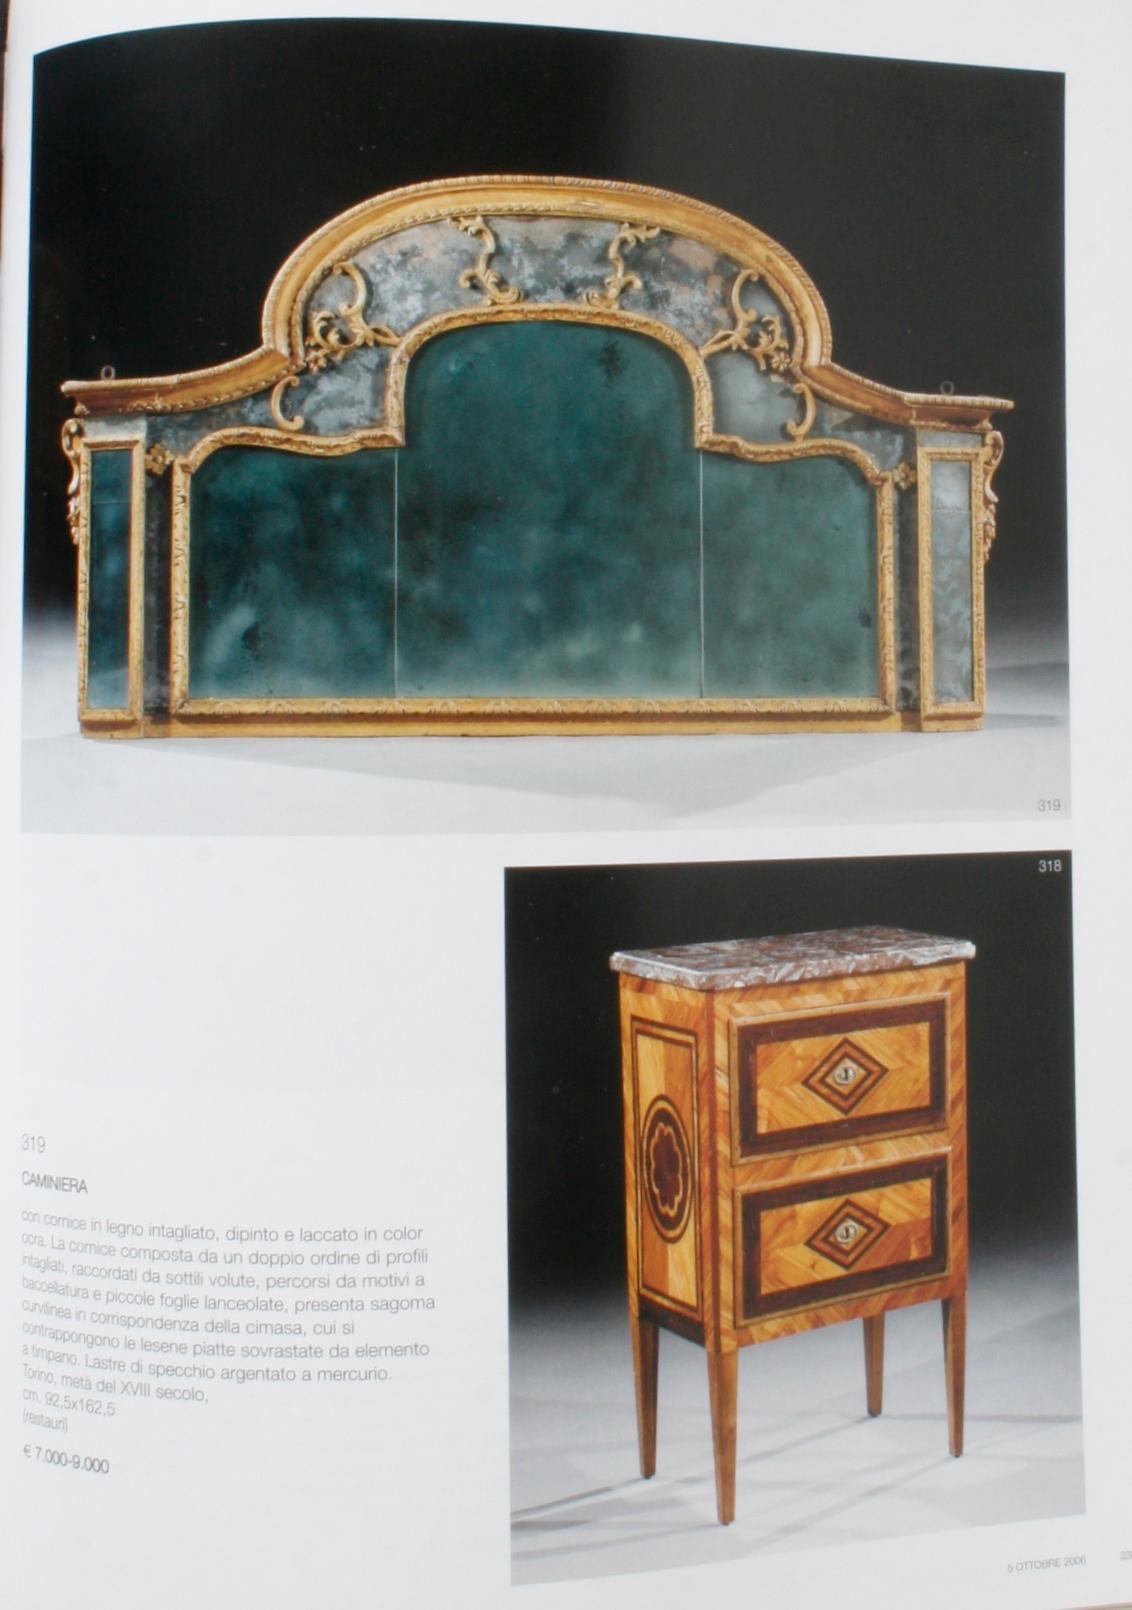 Auction Catalogue of Italian Fine Art, Silver, Ivory, and Venetian Objects, 2006 For Sale 3